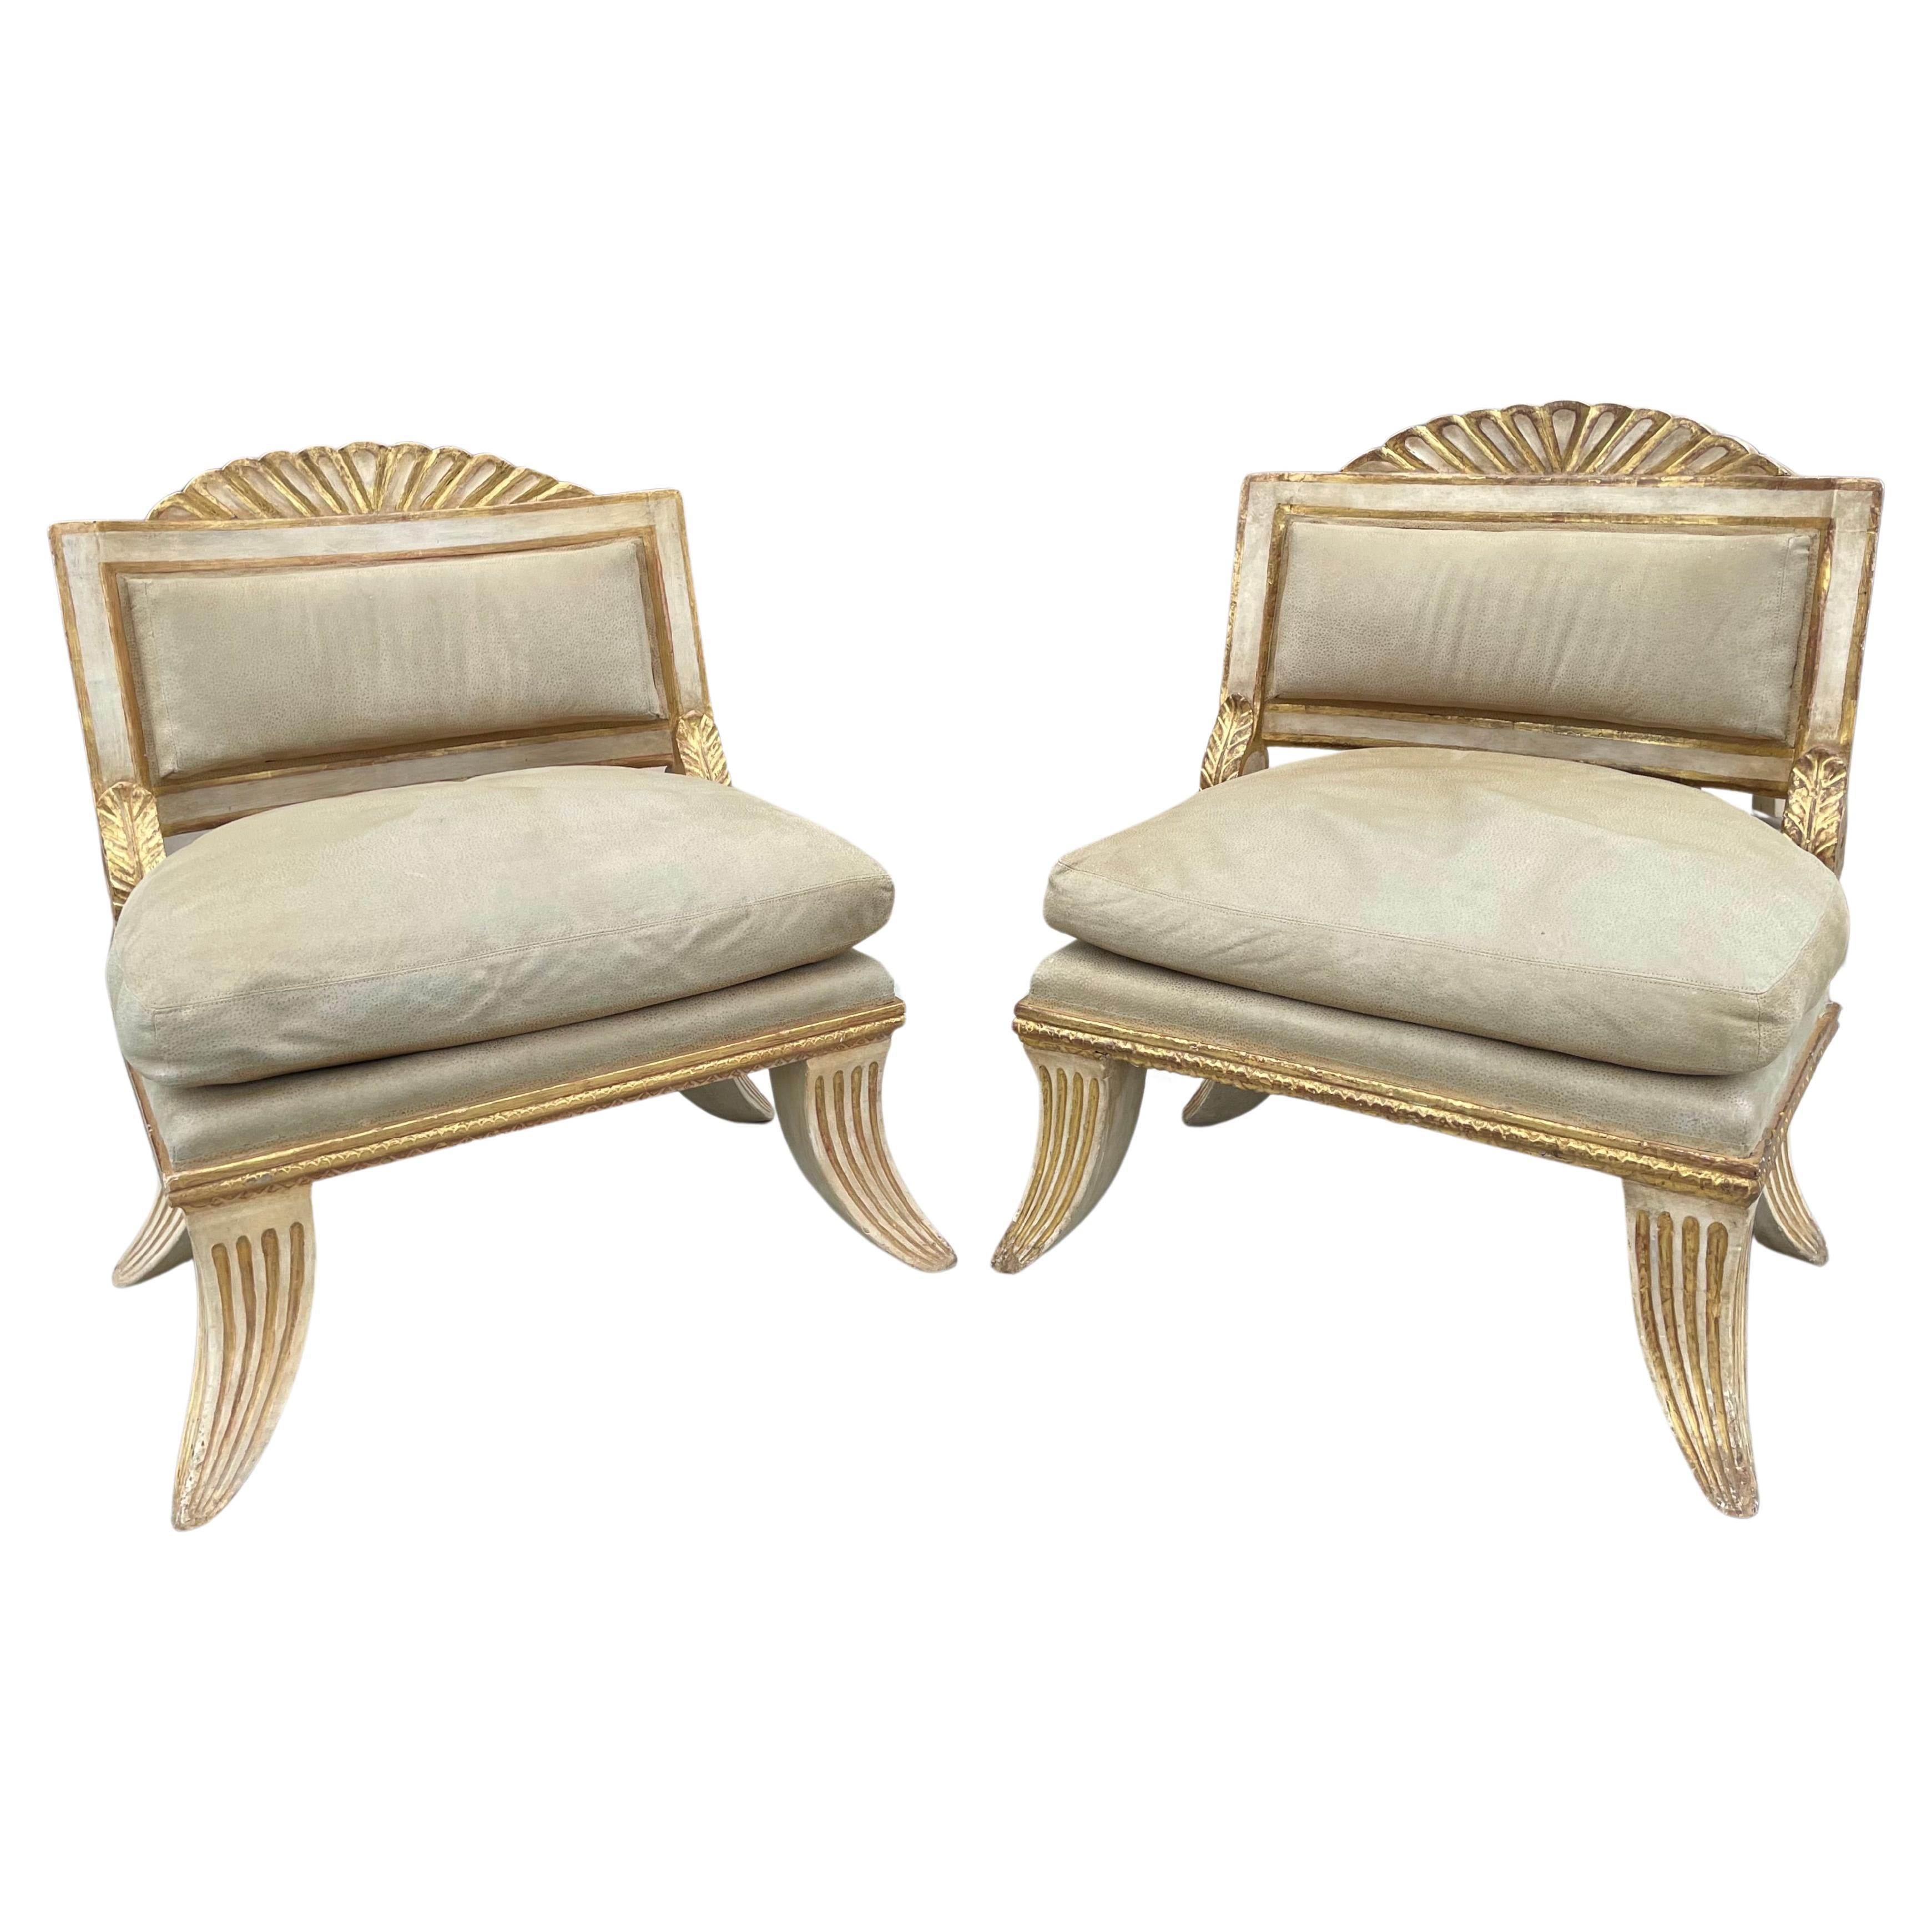 Magnificent Pair of Swedish Style Lounge Chairs from a Seacliff SF Mansion For Sale